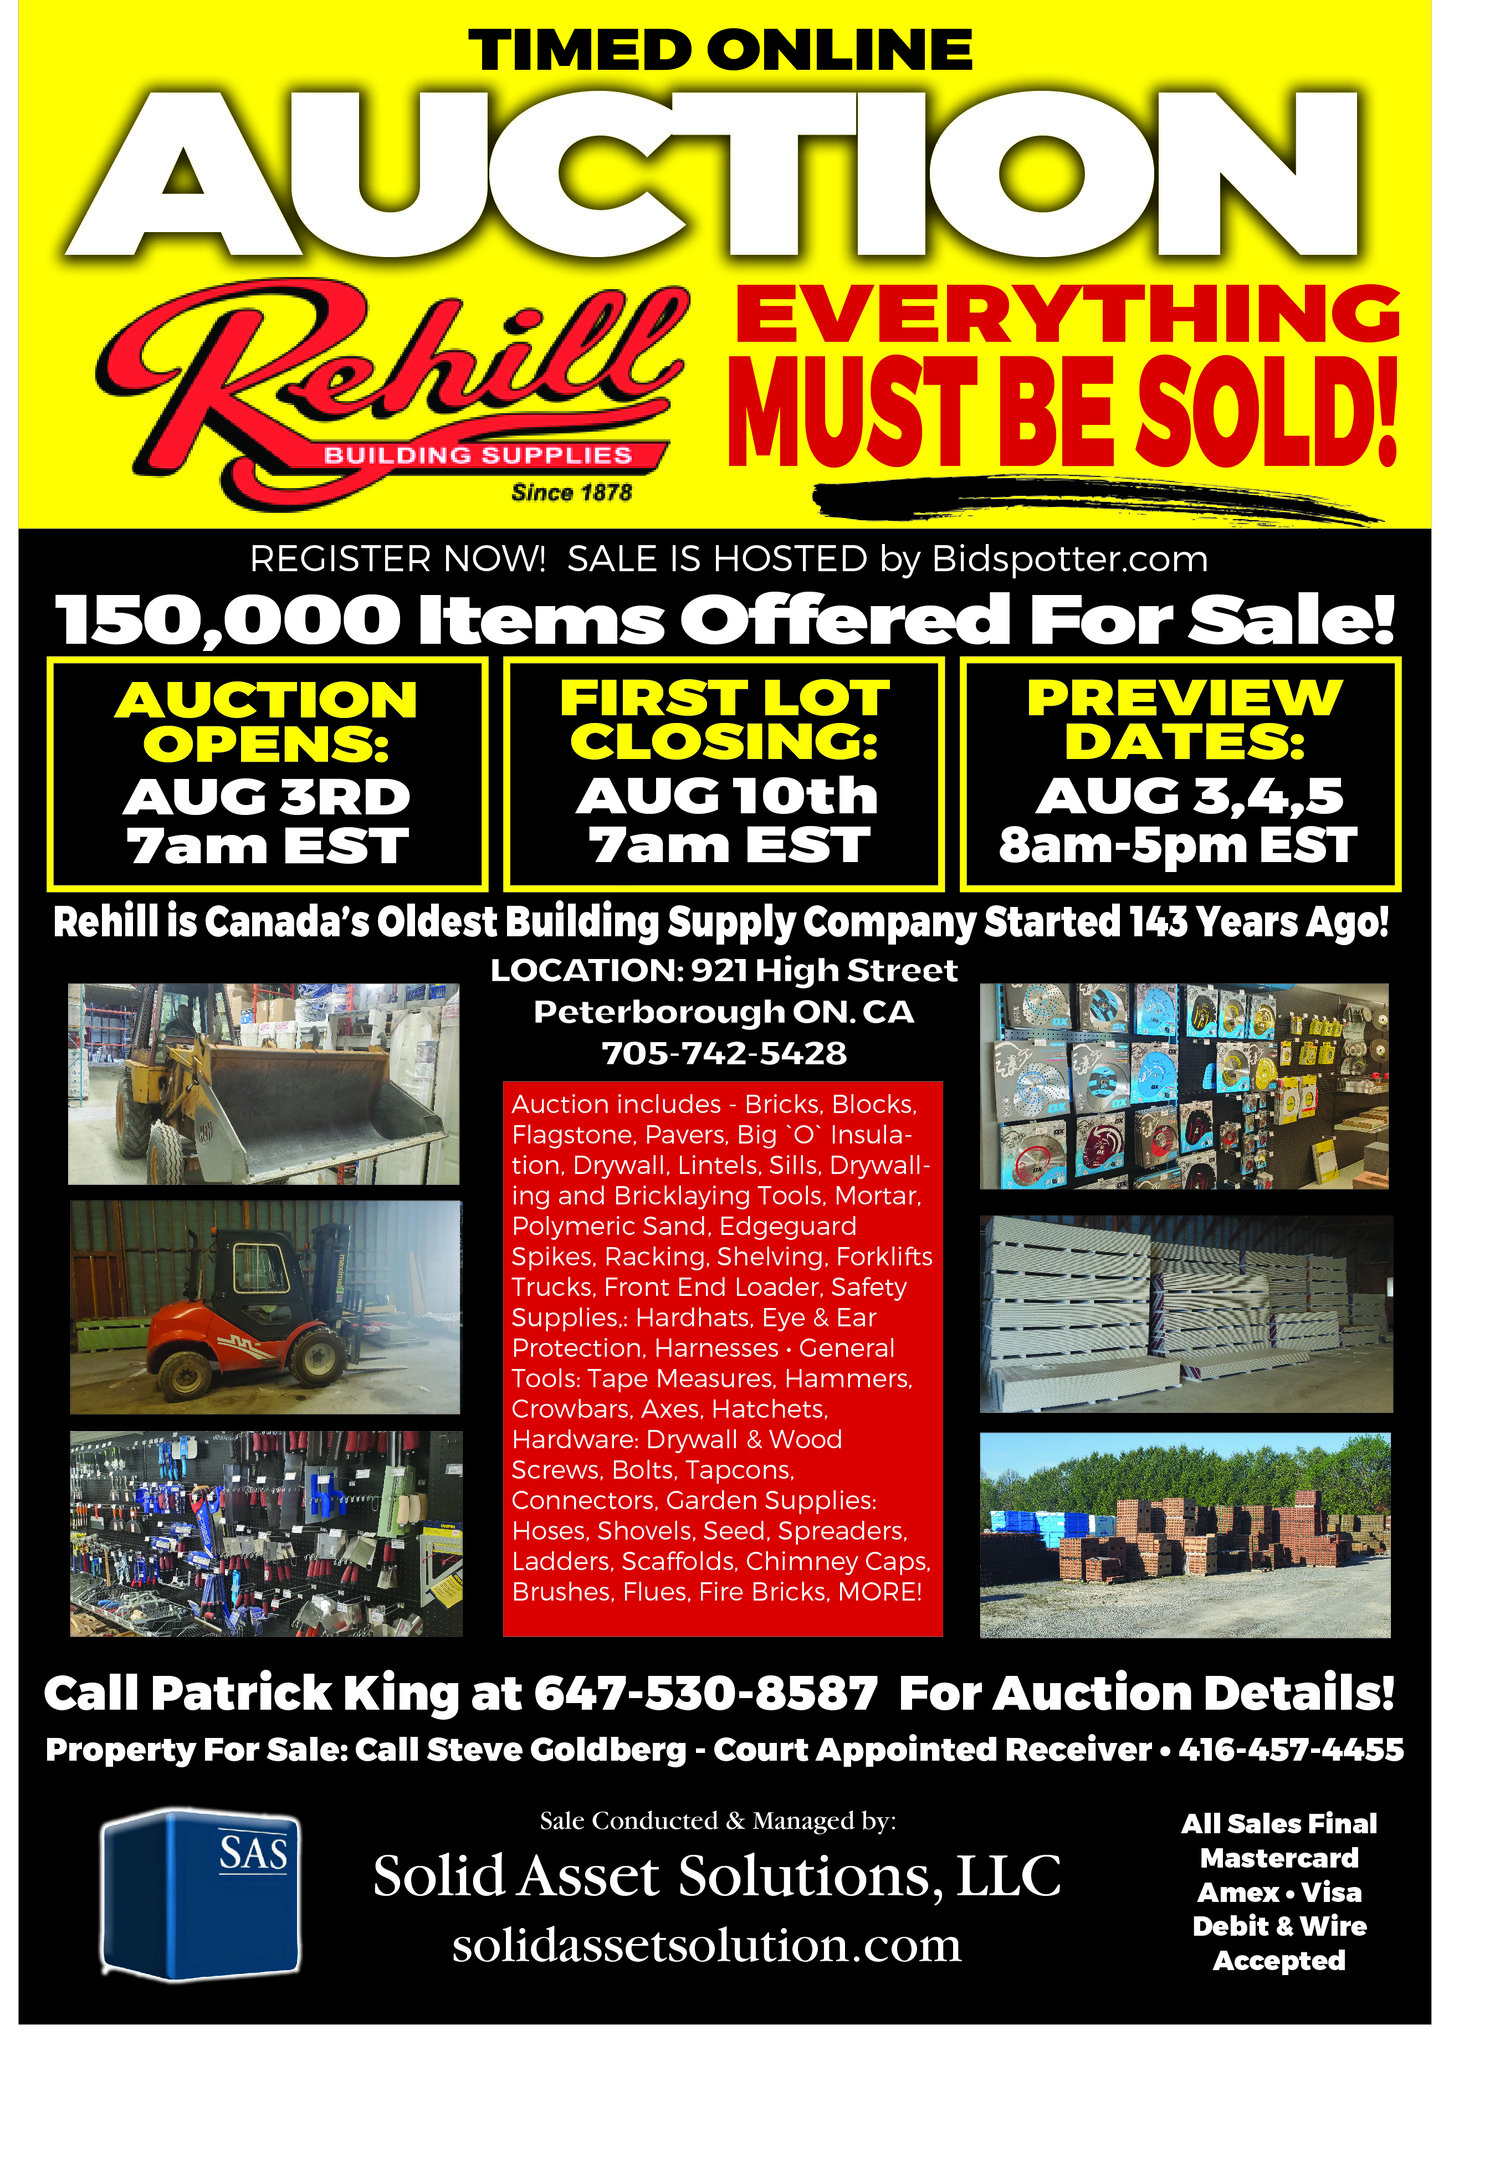 Rehill Building Supplies Timed Online Auction Solid Asset Solutions